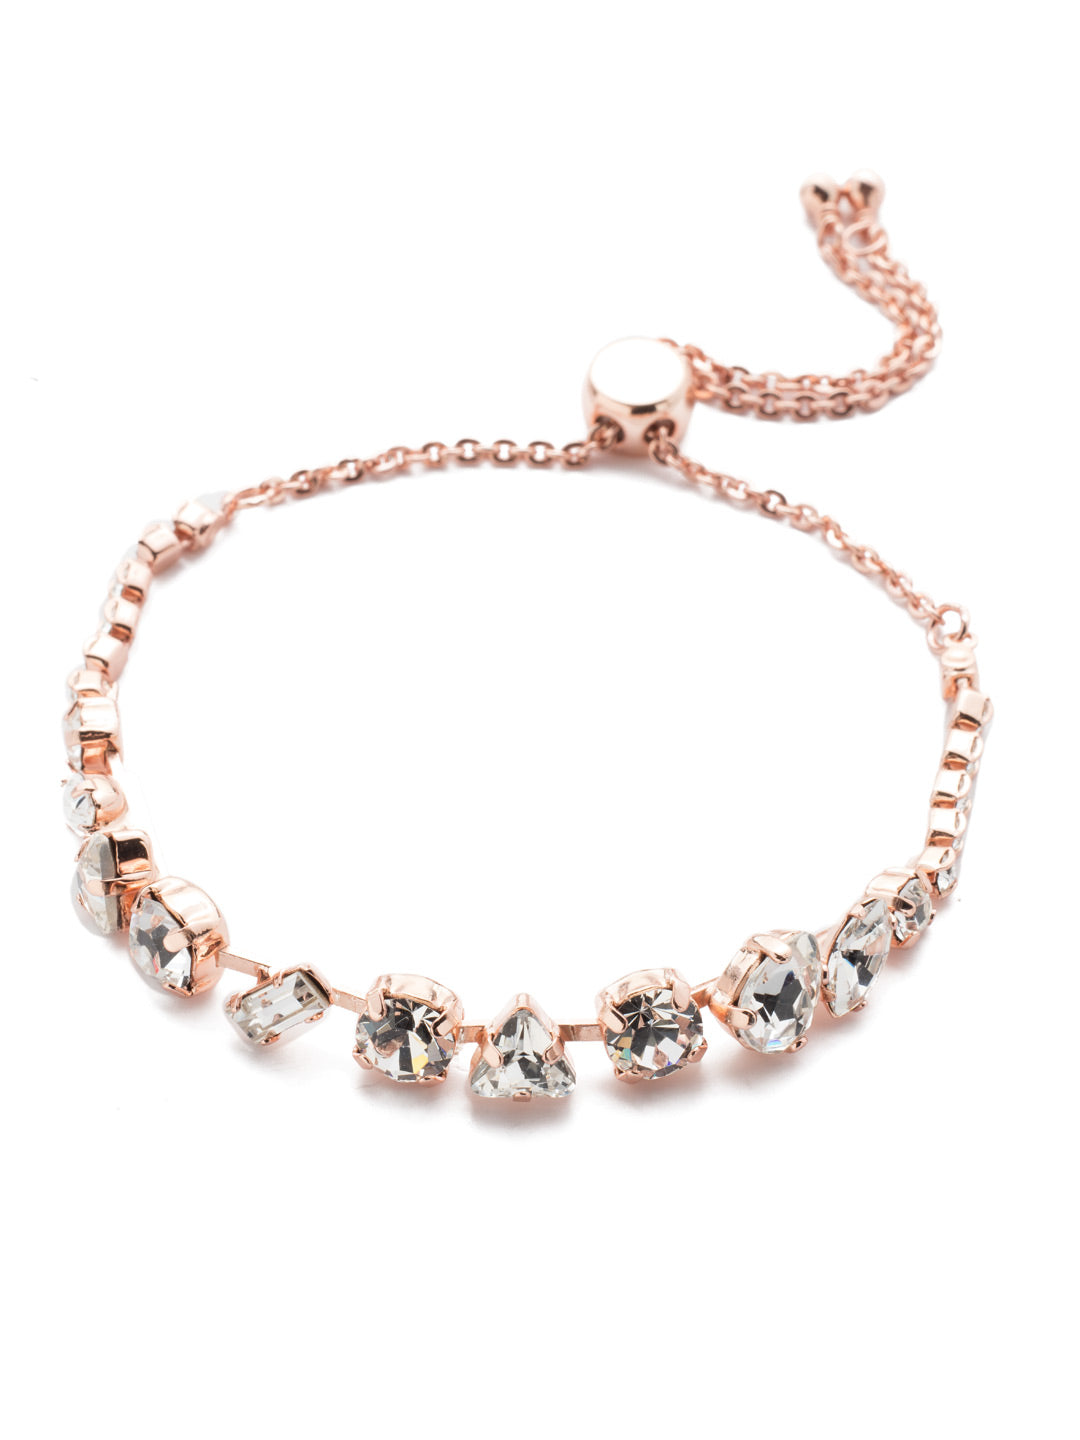 Cherished Slider Bracelet - BEK19RGCRY - <p>One shape doesn't have to fit all. Go for versatility with crystals of all kinds in a slider you can match to any outfit. Slider bracelet closure. From Sorrelli's Crystal collection in our Rose Gold-tone finish.</p>